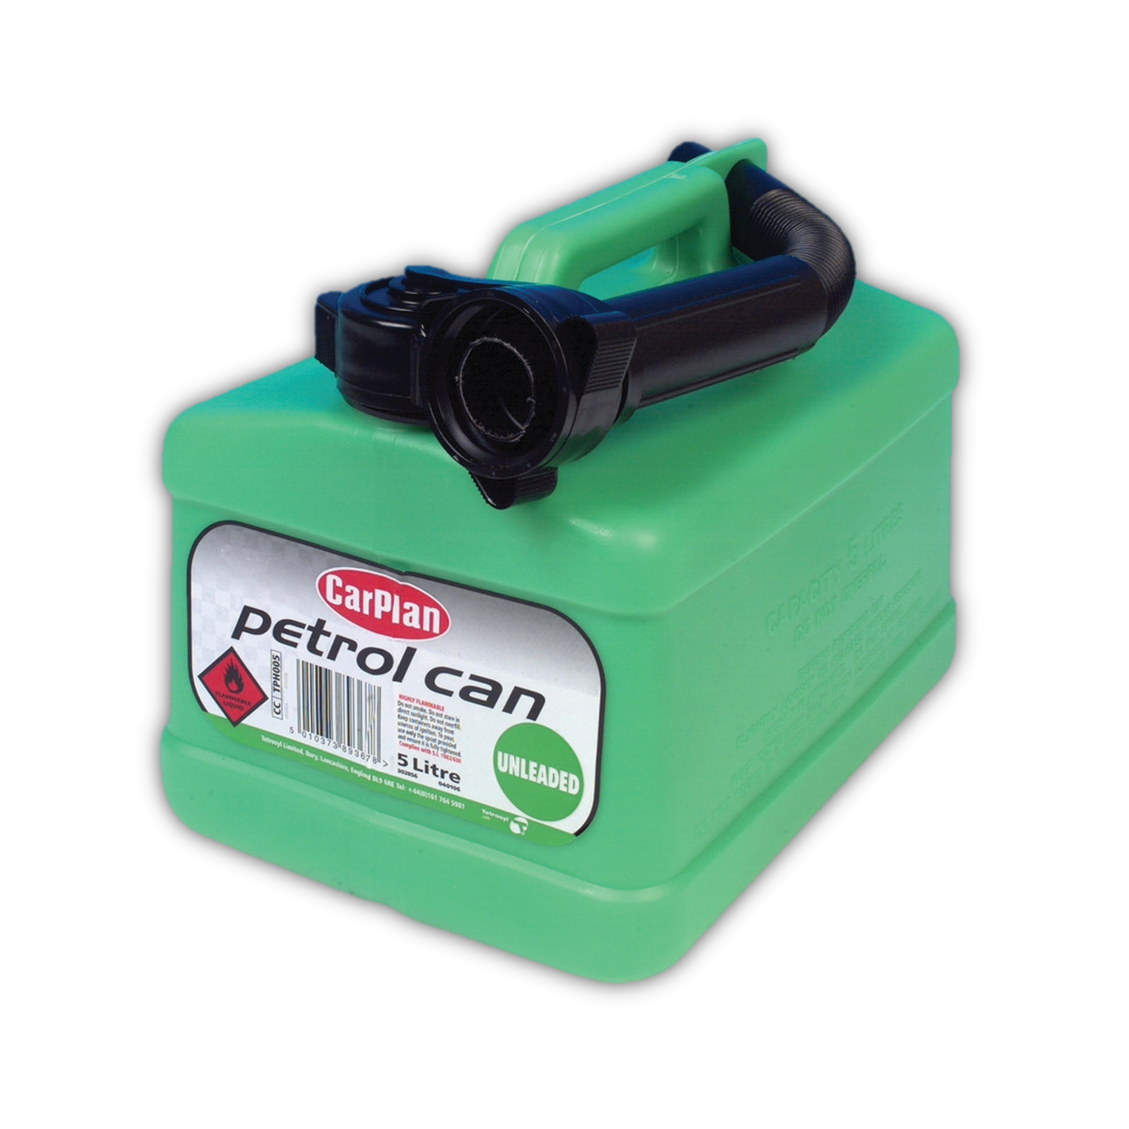 Picture of Carplan Tph005 Fuel Can - Unleaded 5